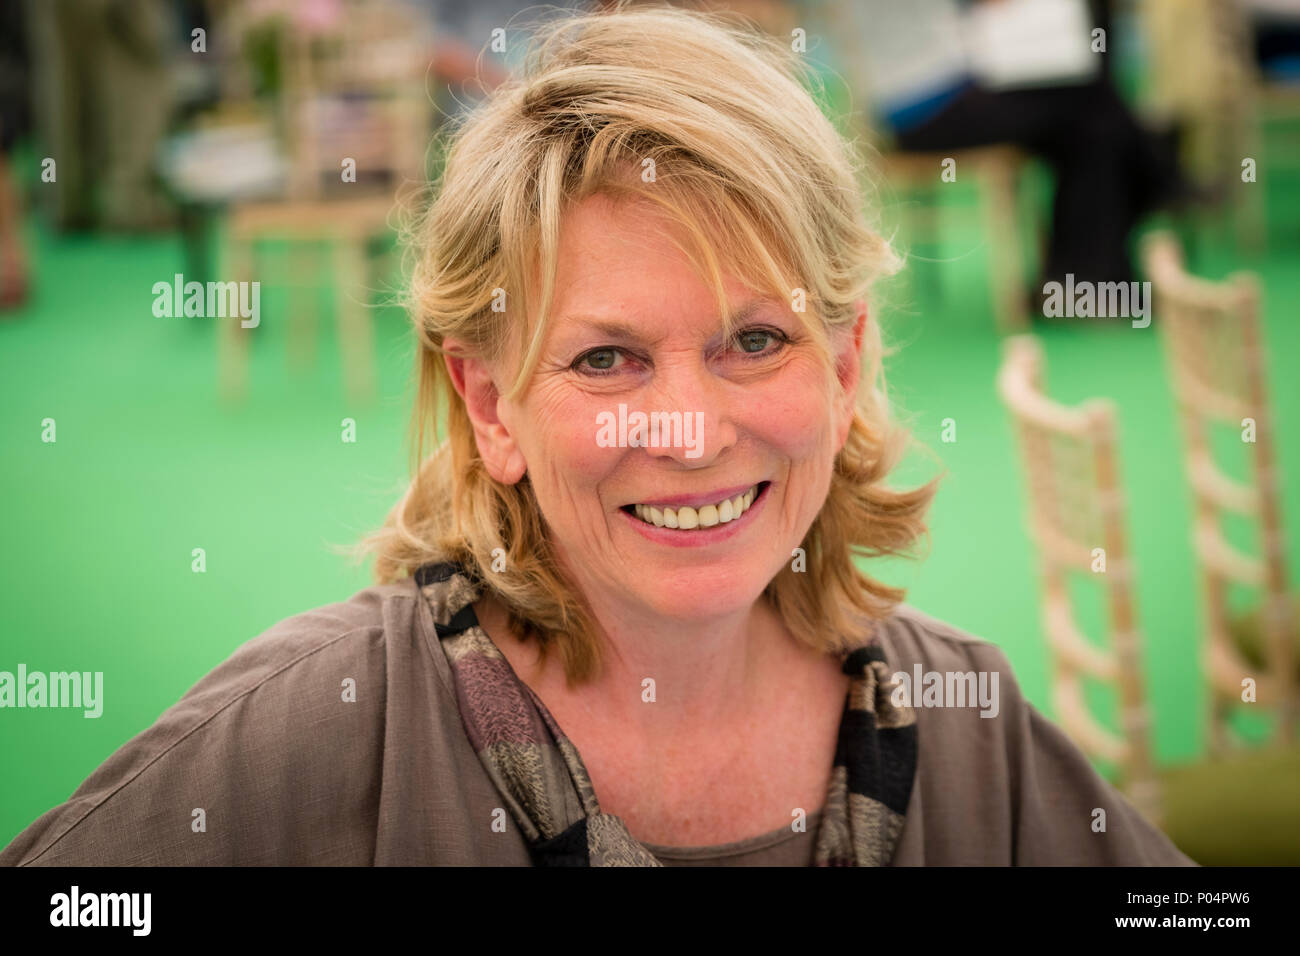 Rita Carter: Science writer - author of the book 'The Brain in Minutes', speaking at the Hay Festival  of Literature and the Arts, May 2018  Science and medical writer, Rita Carter has twice been awarded the Medical Journalists' Association prize for outstanding contribution to medical journalism. She has written several books and been shortlisted for the Royal Society Prize for Science Books Stock Photo